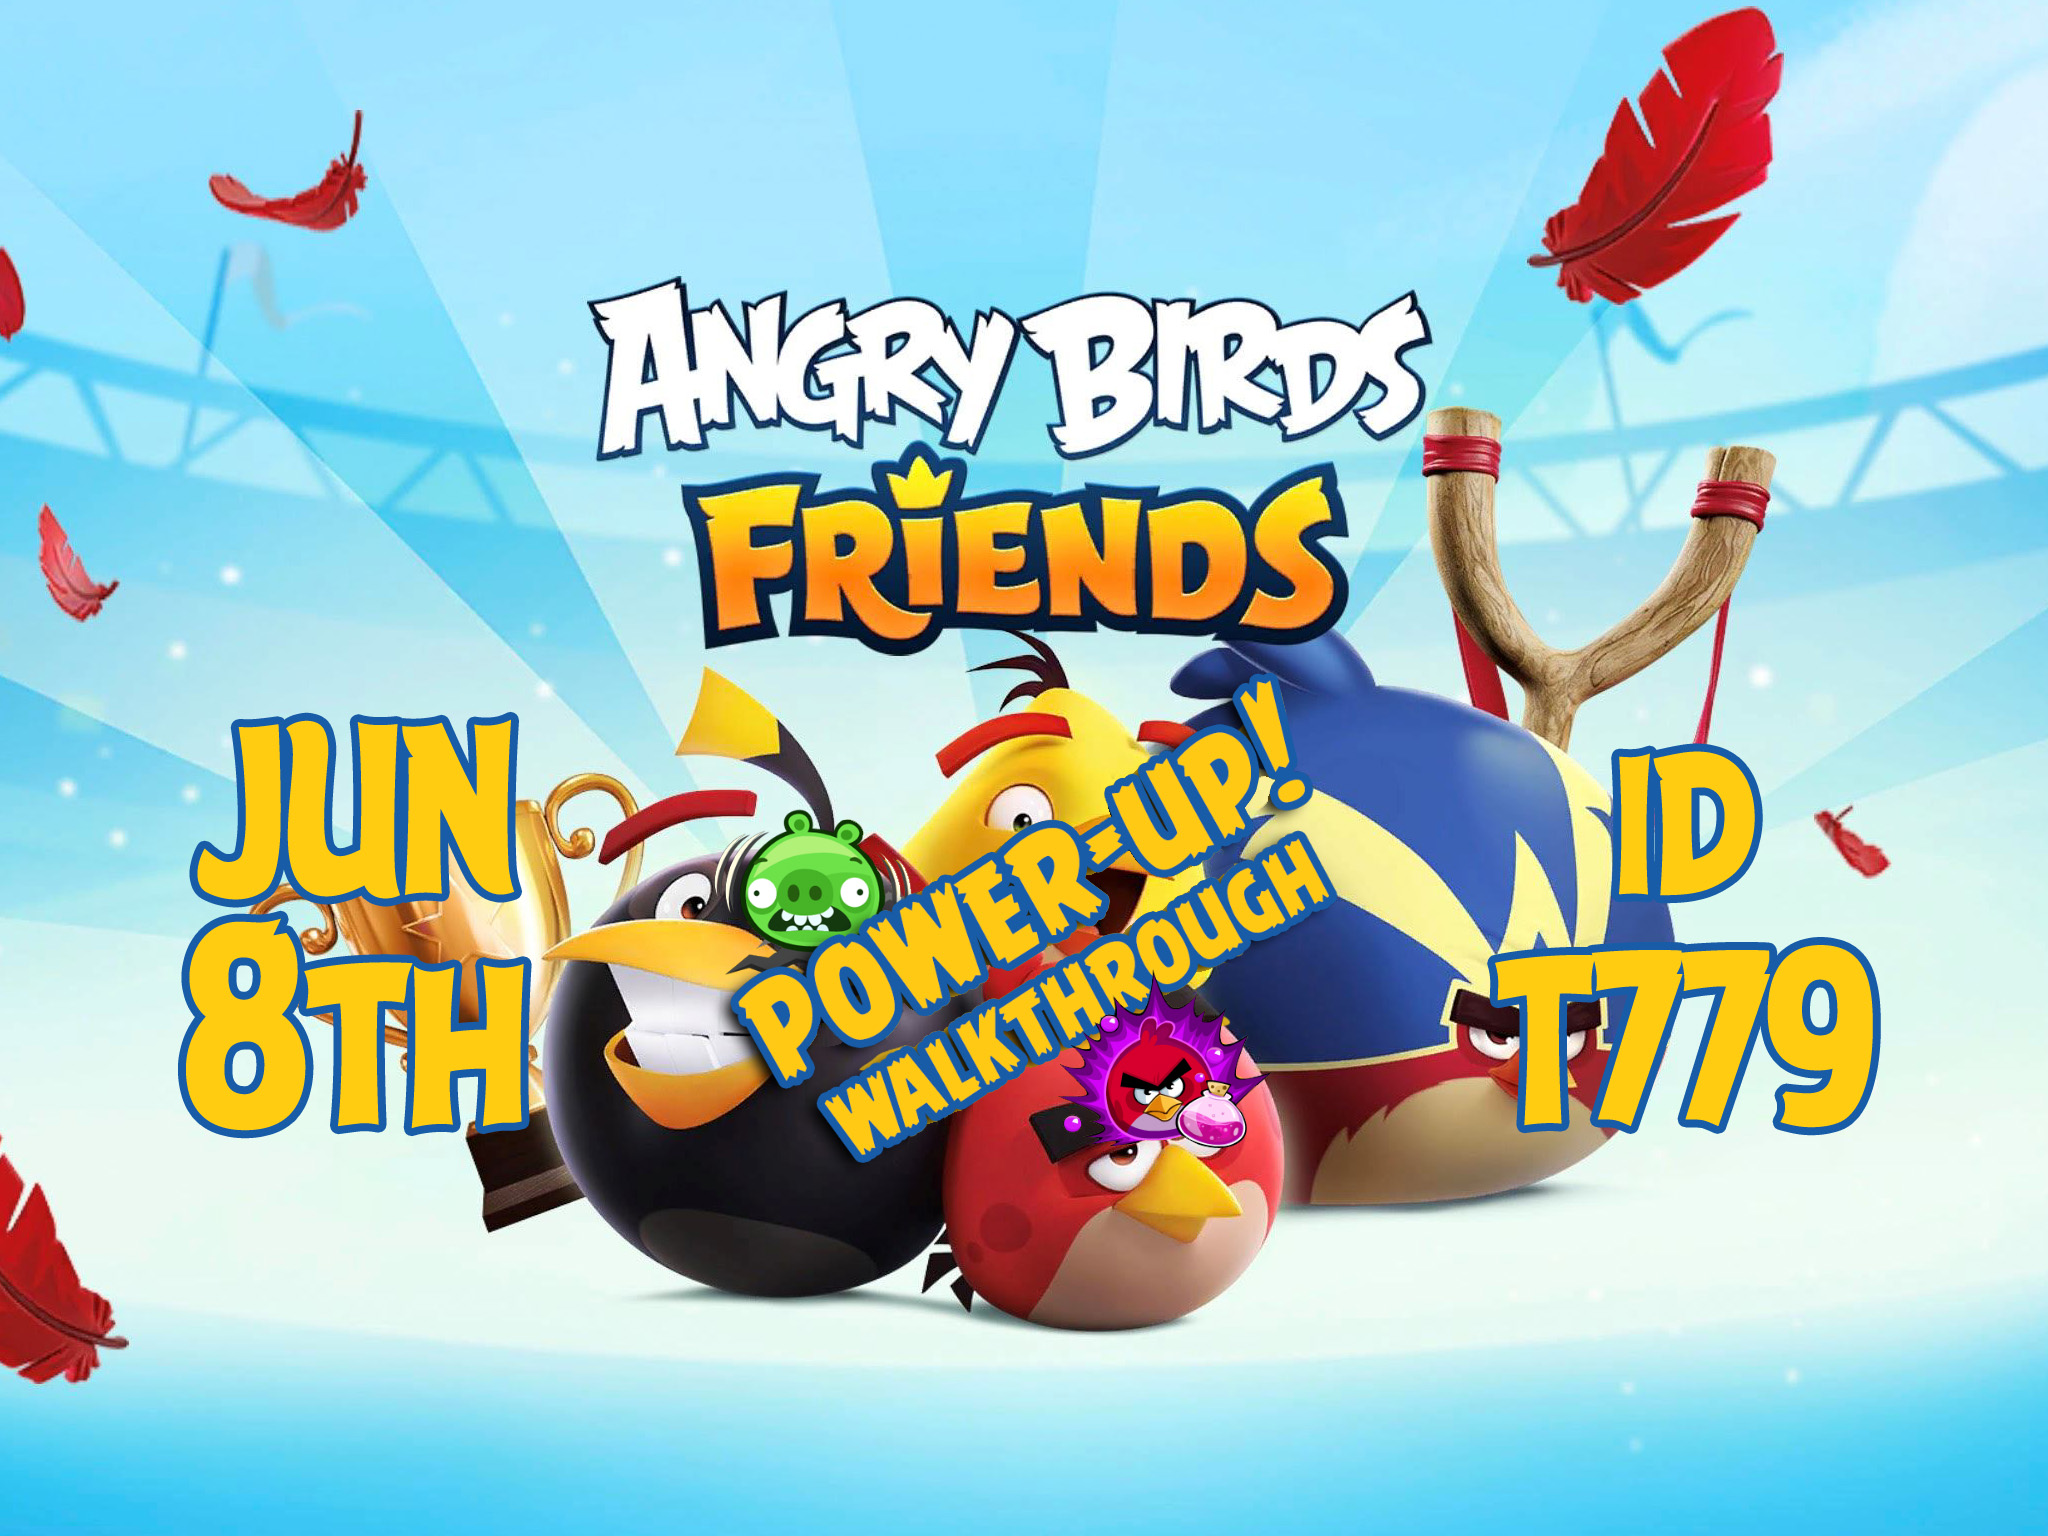 Angry-Birds-Friends-Tournament-T779-Feature-Image-PU